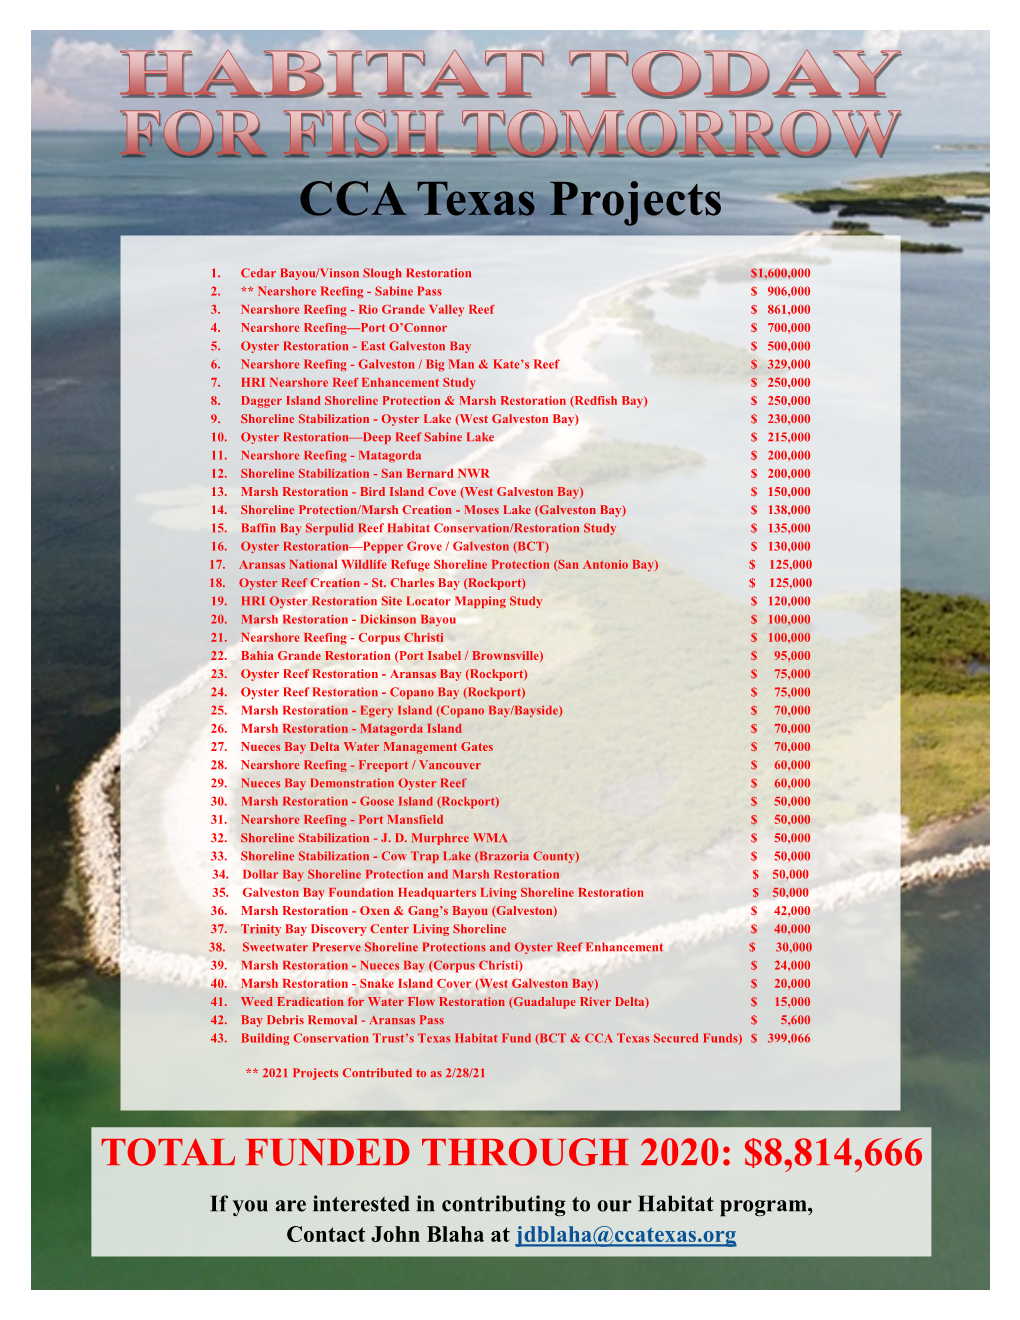 CCA Texas Projects